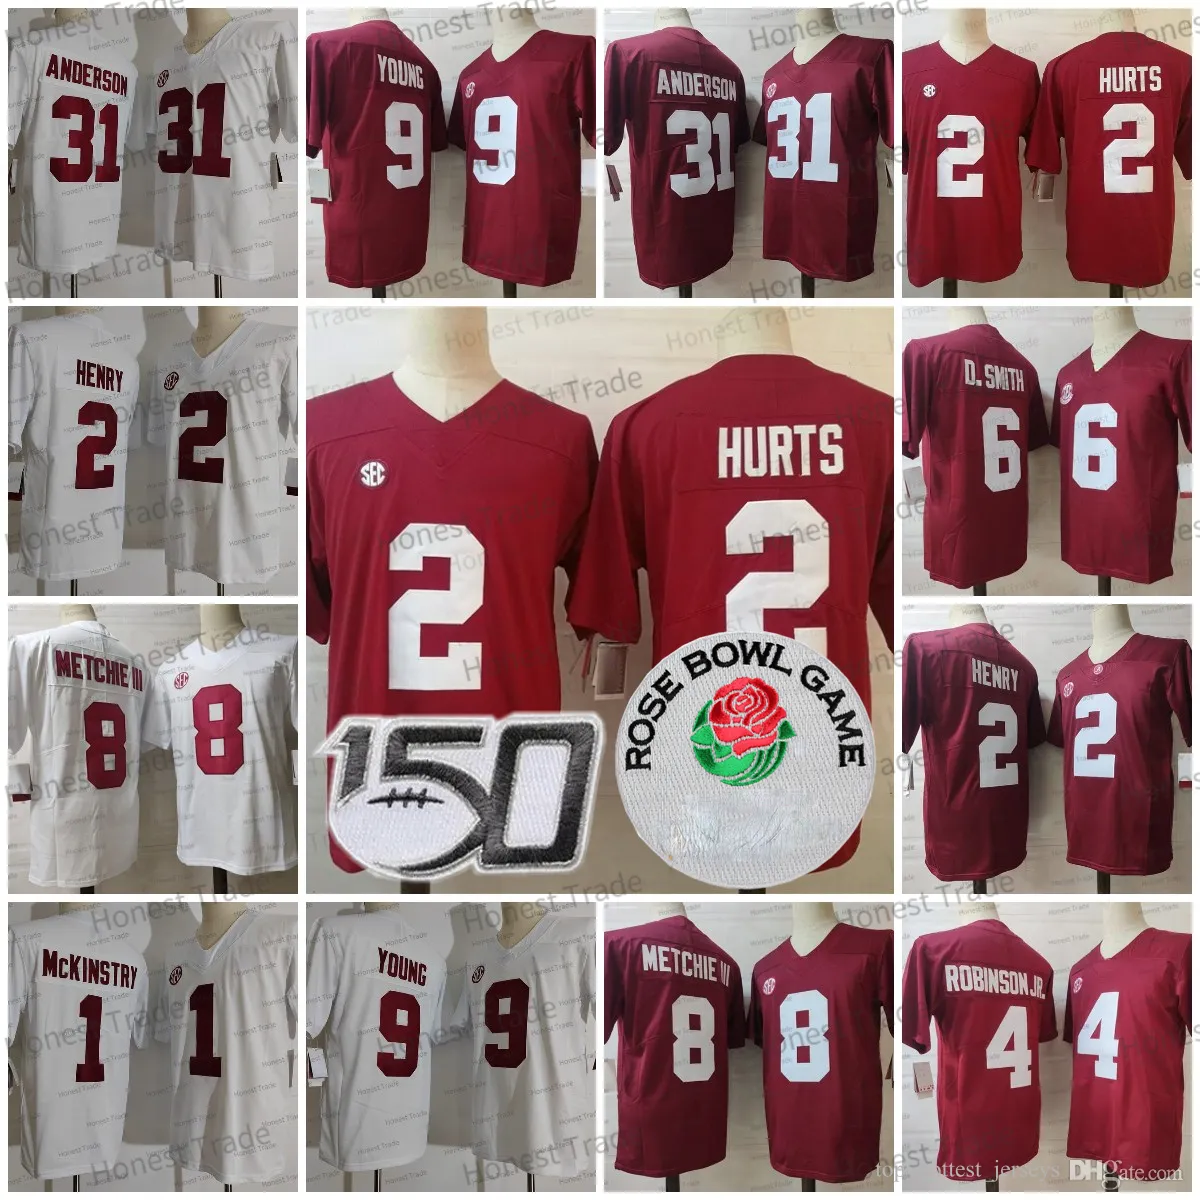 College 31 Anderson Football Jersey 9 Young Hurts 2 Derrick Henry 1 McKintry 8 John Metchie III 4 Robinson Jr. Jalen Milroe Red White Mens Jerseys